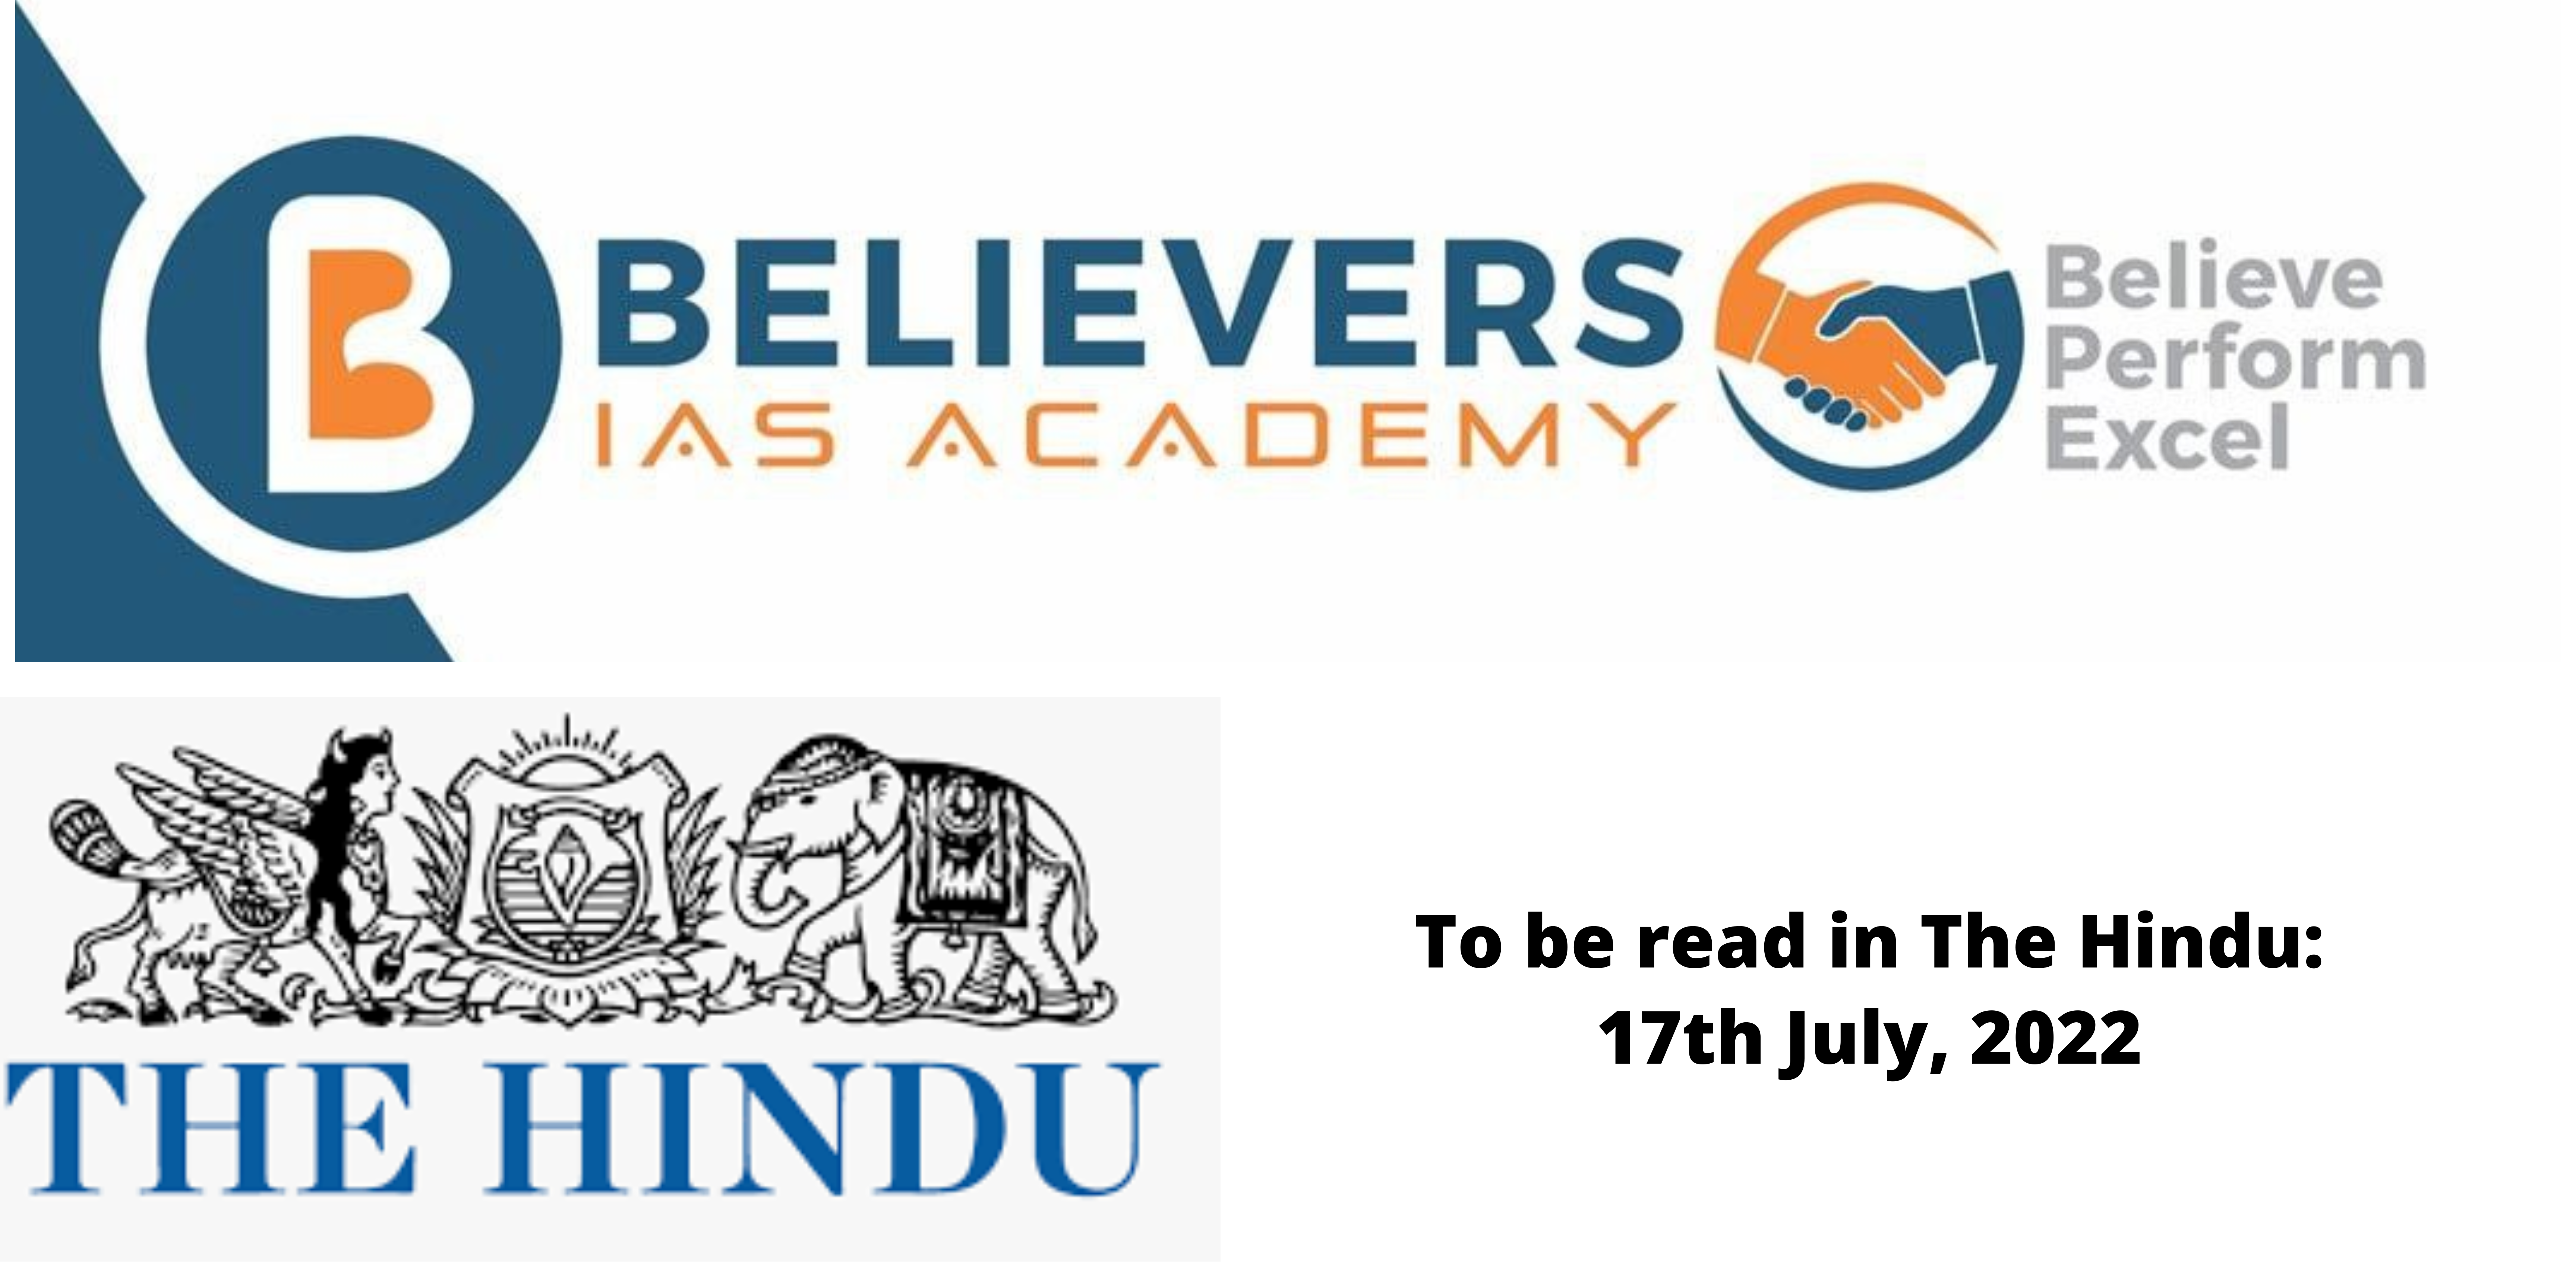 News articles for IAS Exam preparation - 17th July, 2022